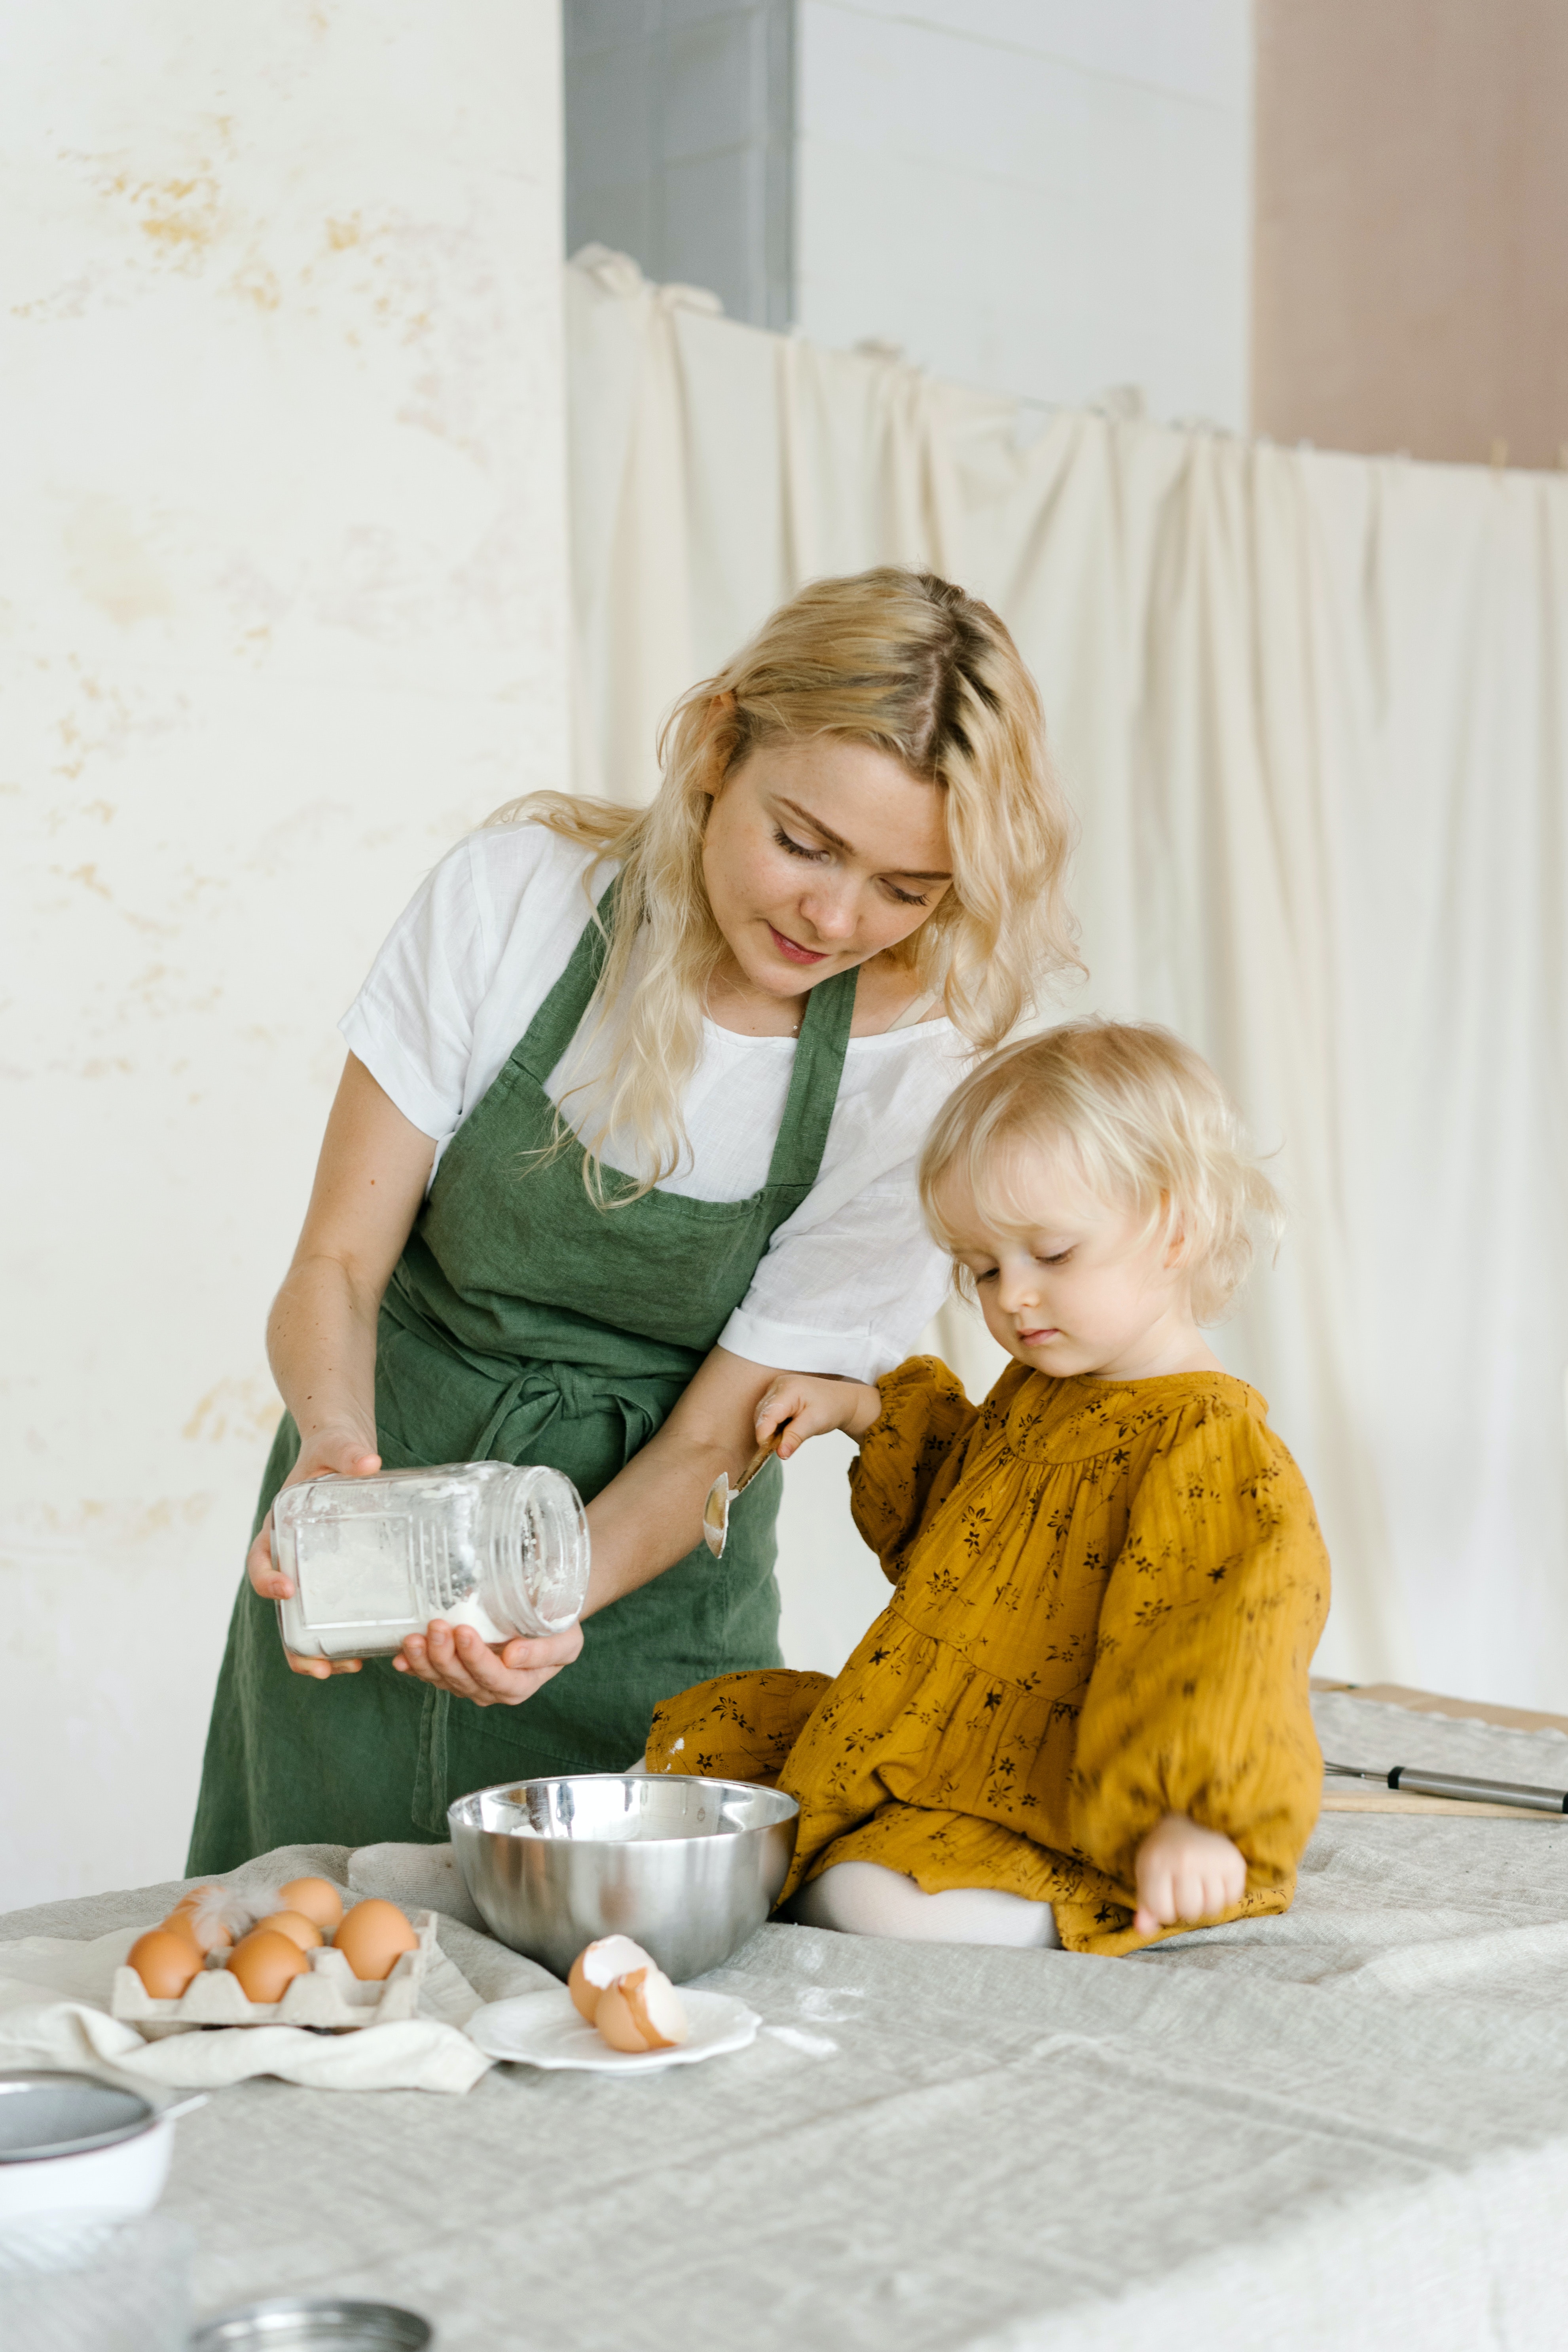  Nutrition for toddlers: Transitioning from baby to toddler foods